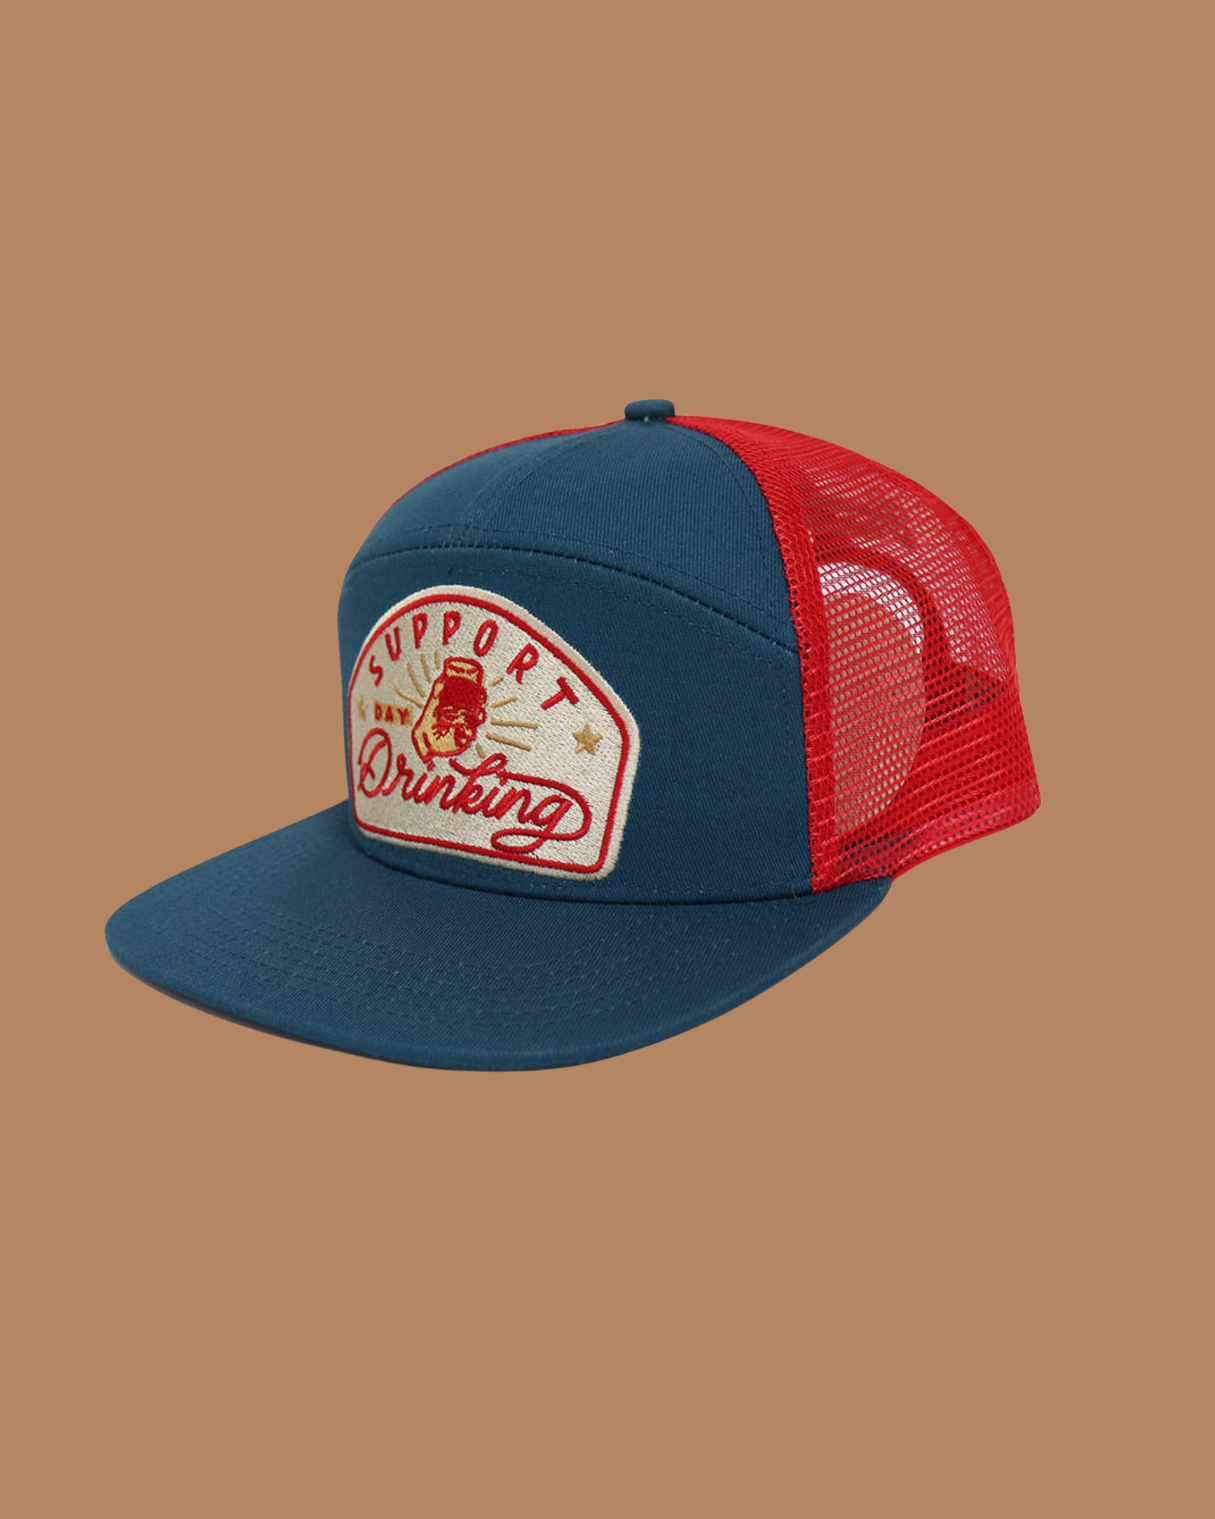 'SUPPORT DAY DRINKING' BARN SESSIONS SPECIAL EDITION CAP